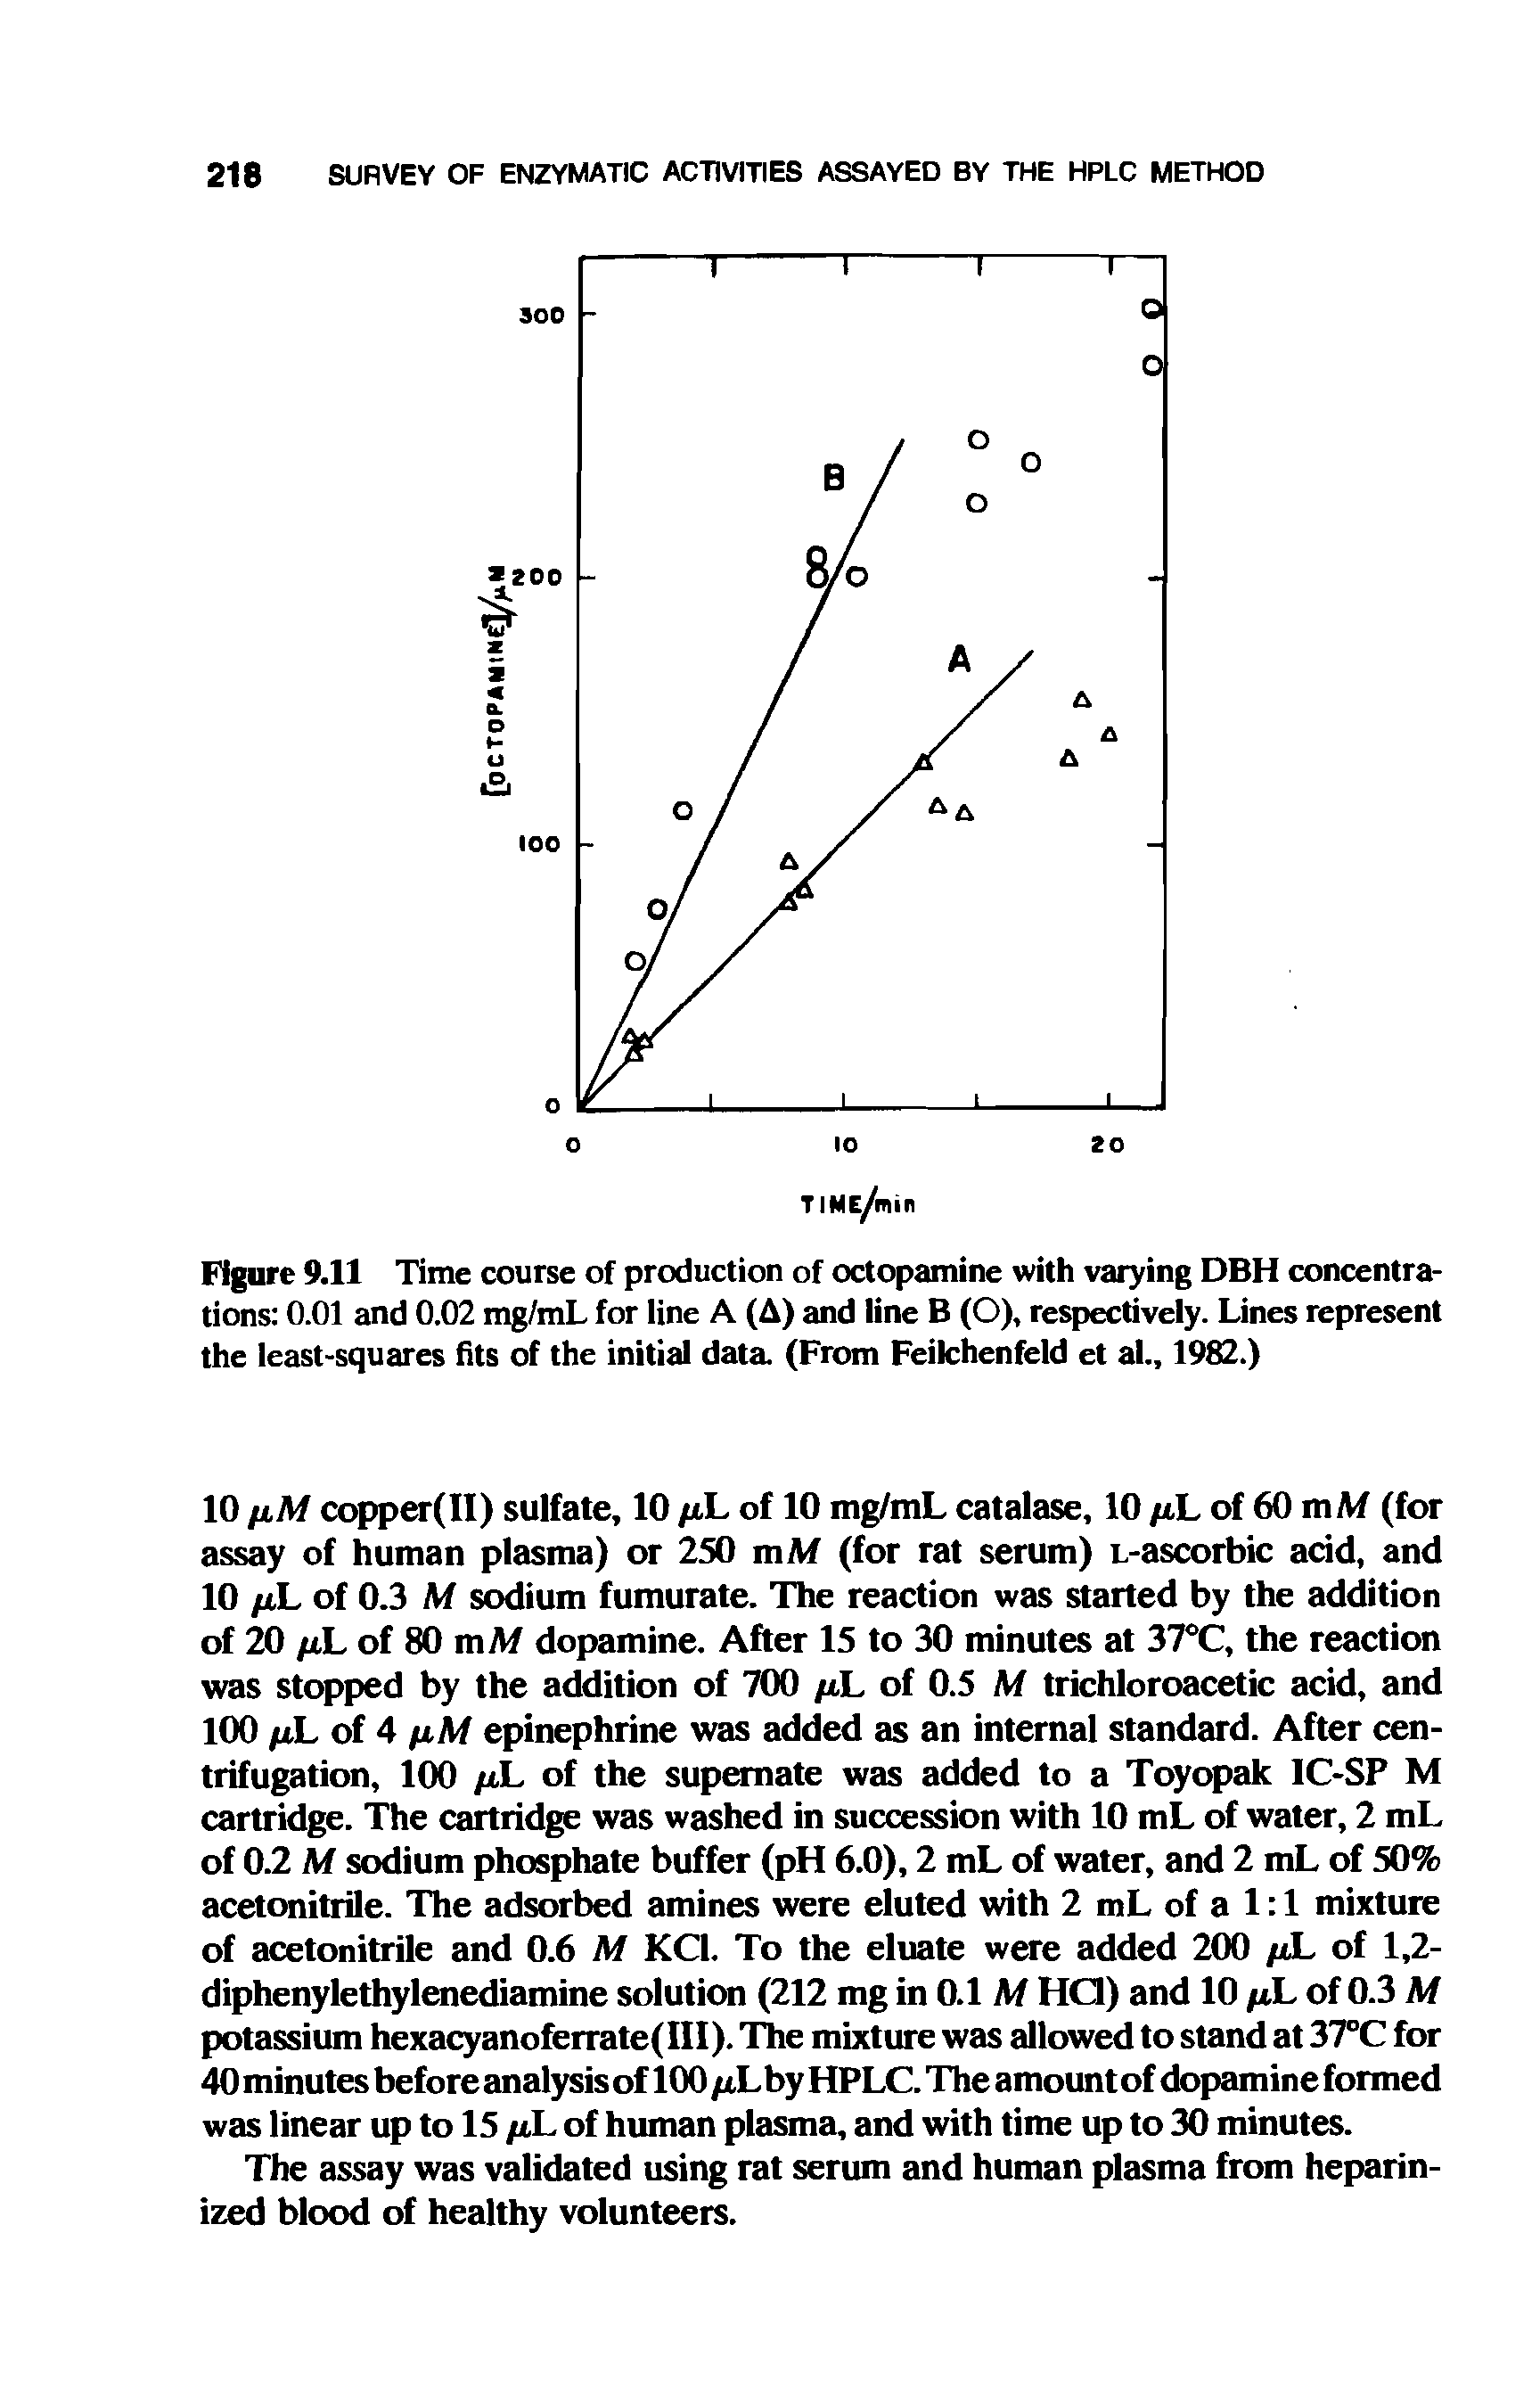 Figure 9.11 Time course of production of octopamine with varying DBH concentrations 0.01 and 0.02 mg/mL for line A (A) and line B (O), respectively. Lines represent the least-squares fits of the initial data (From Feilchenfeld et al., 1982.)...